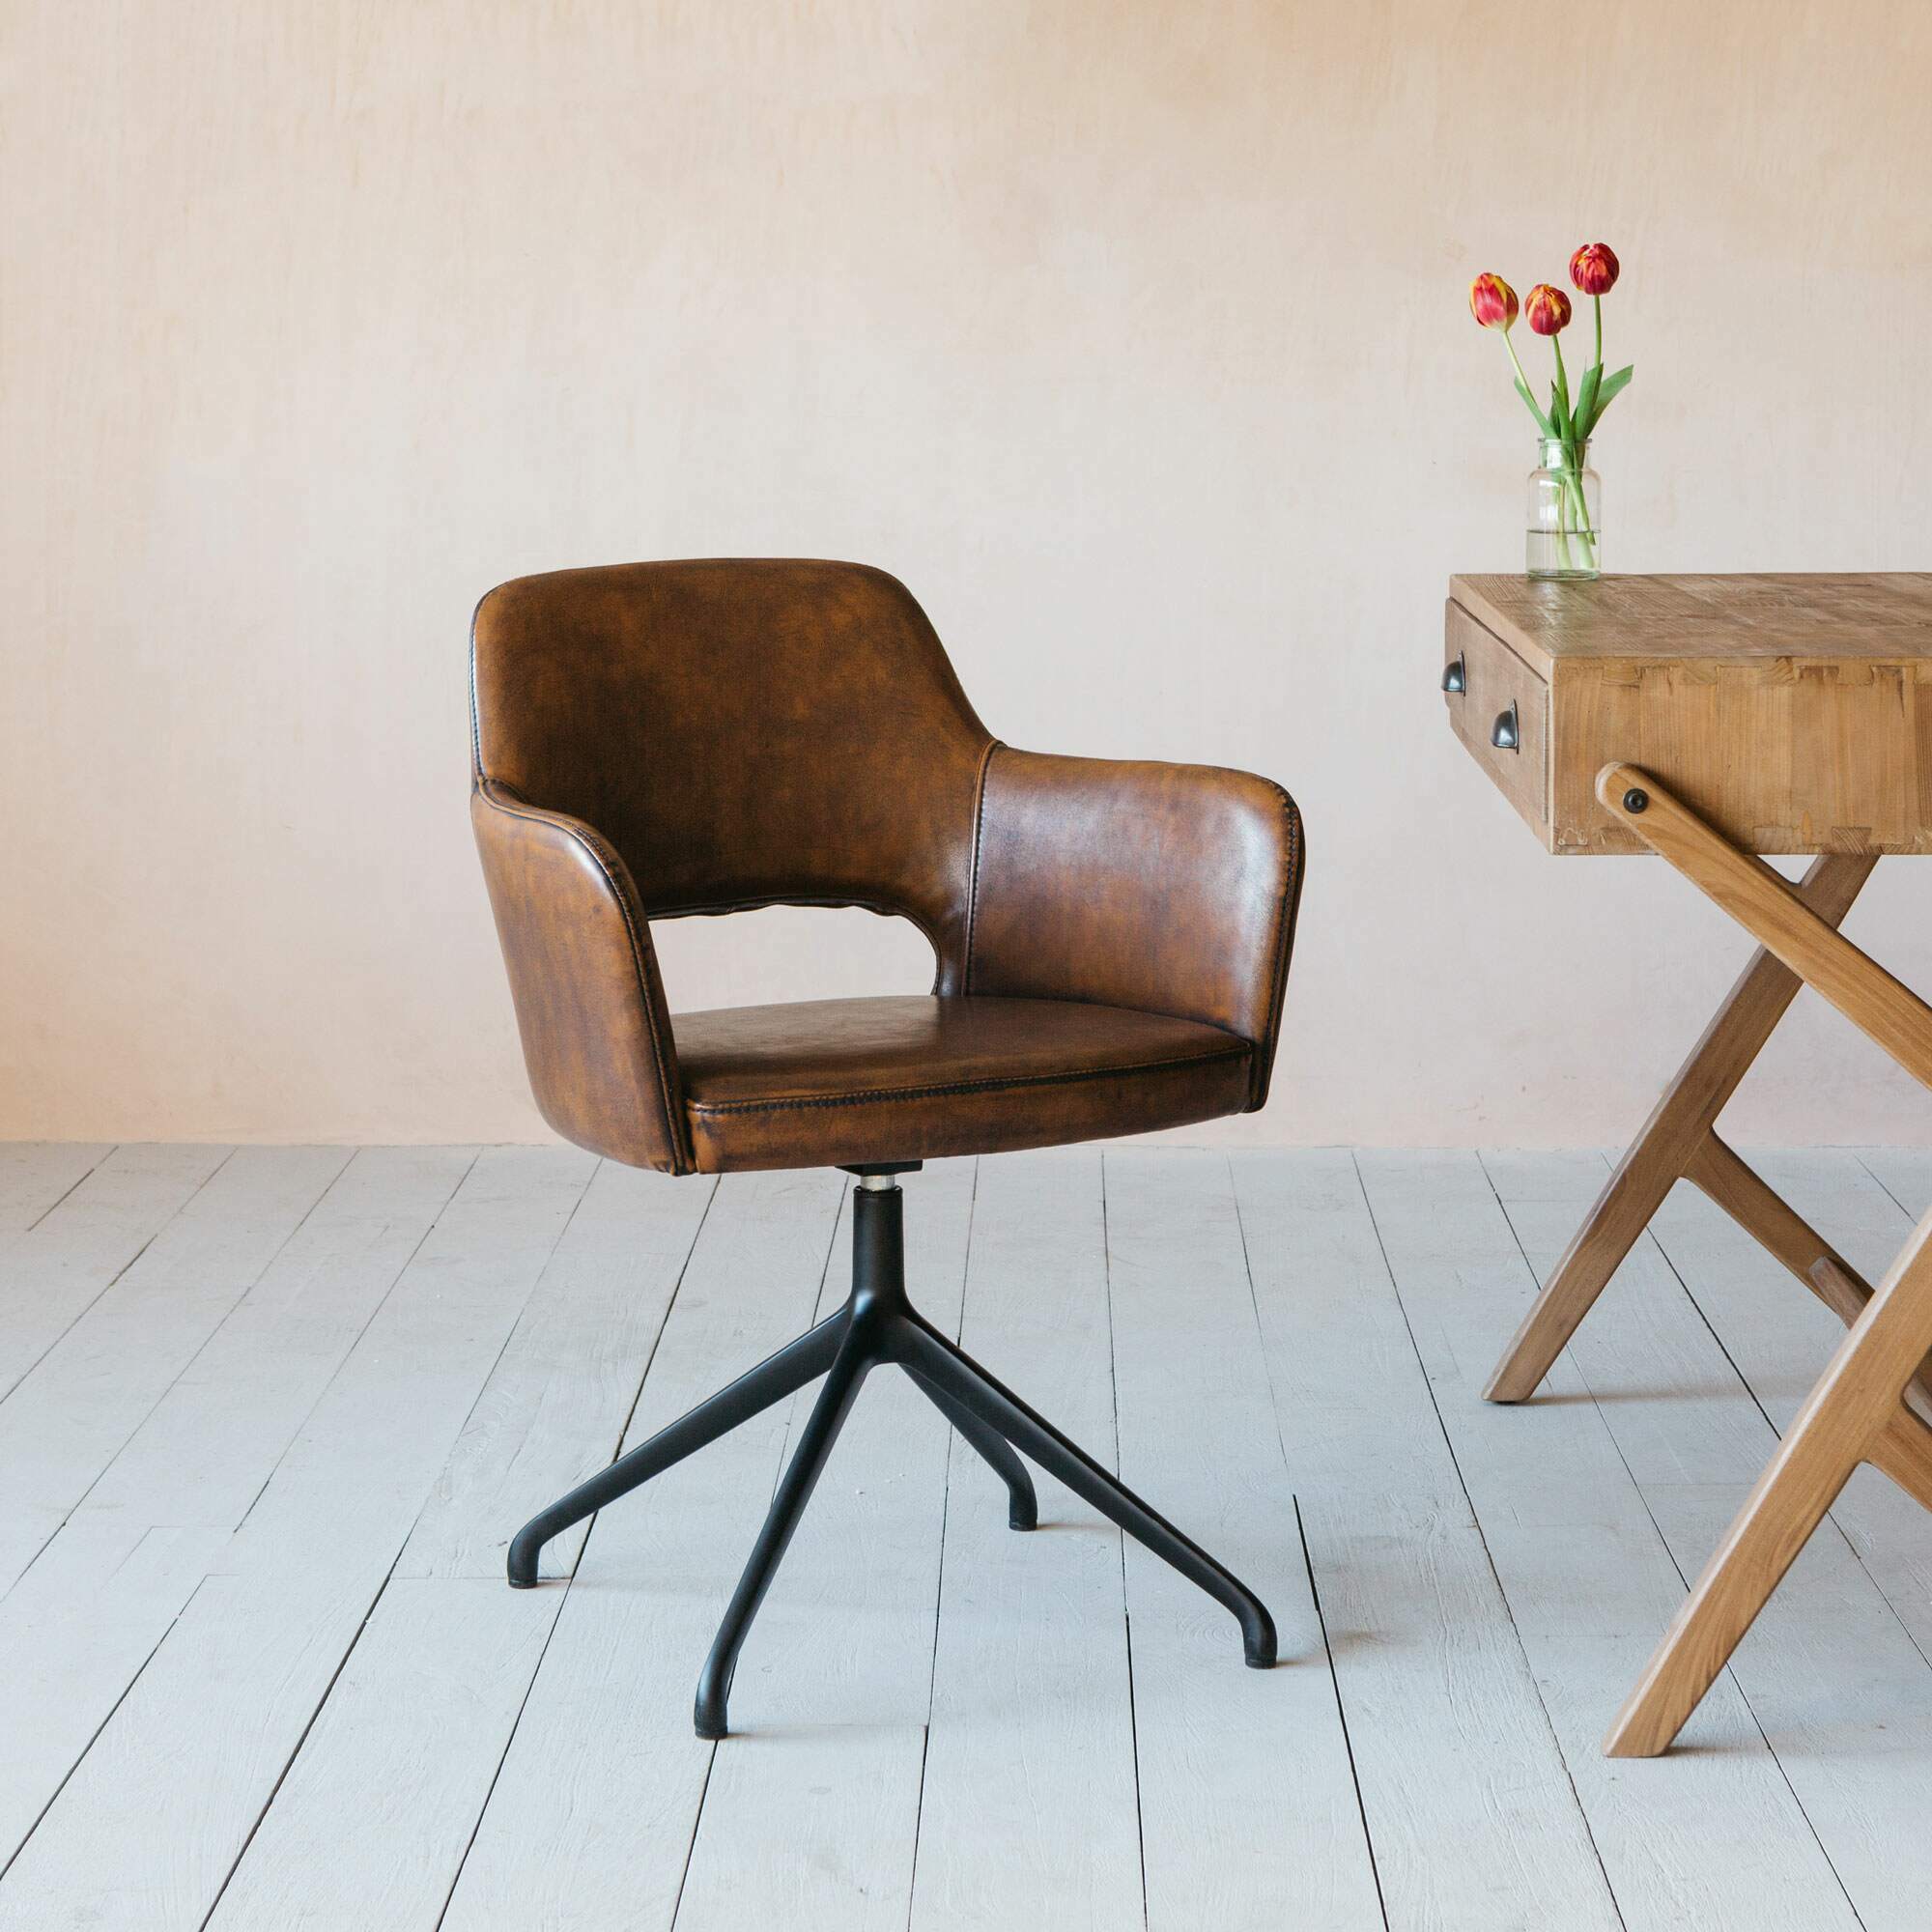 Read more about Graham and green mercer brown swivel chair